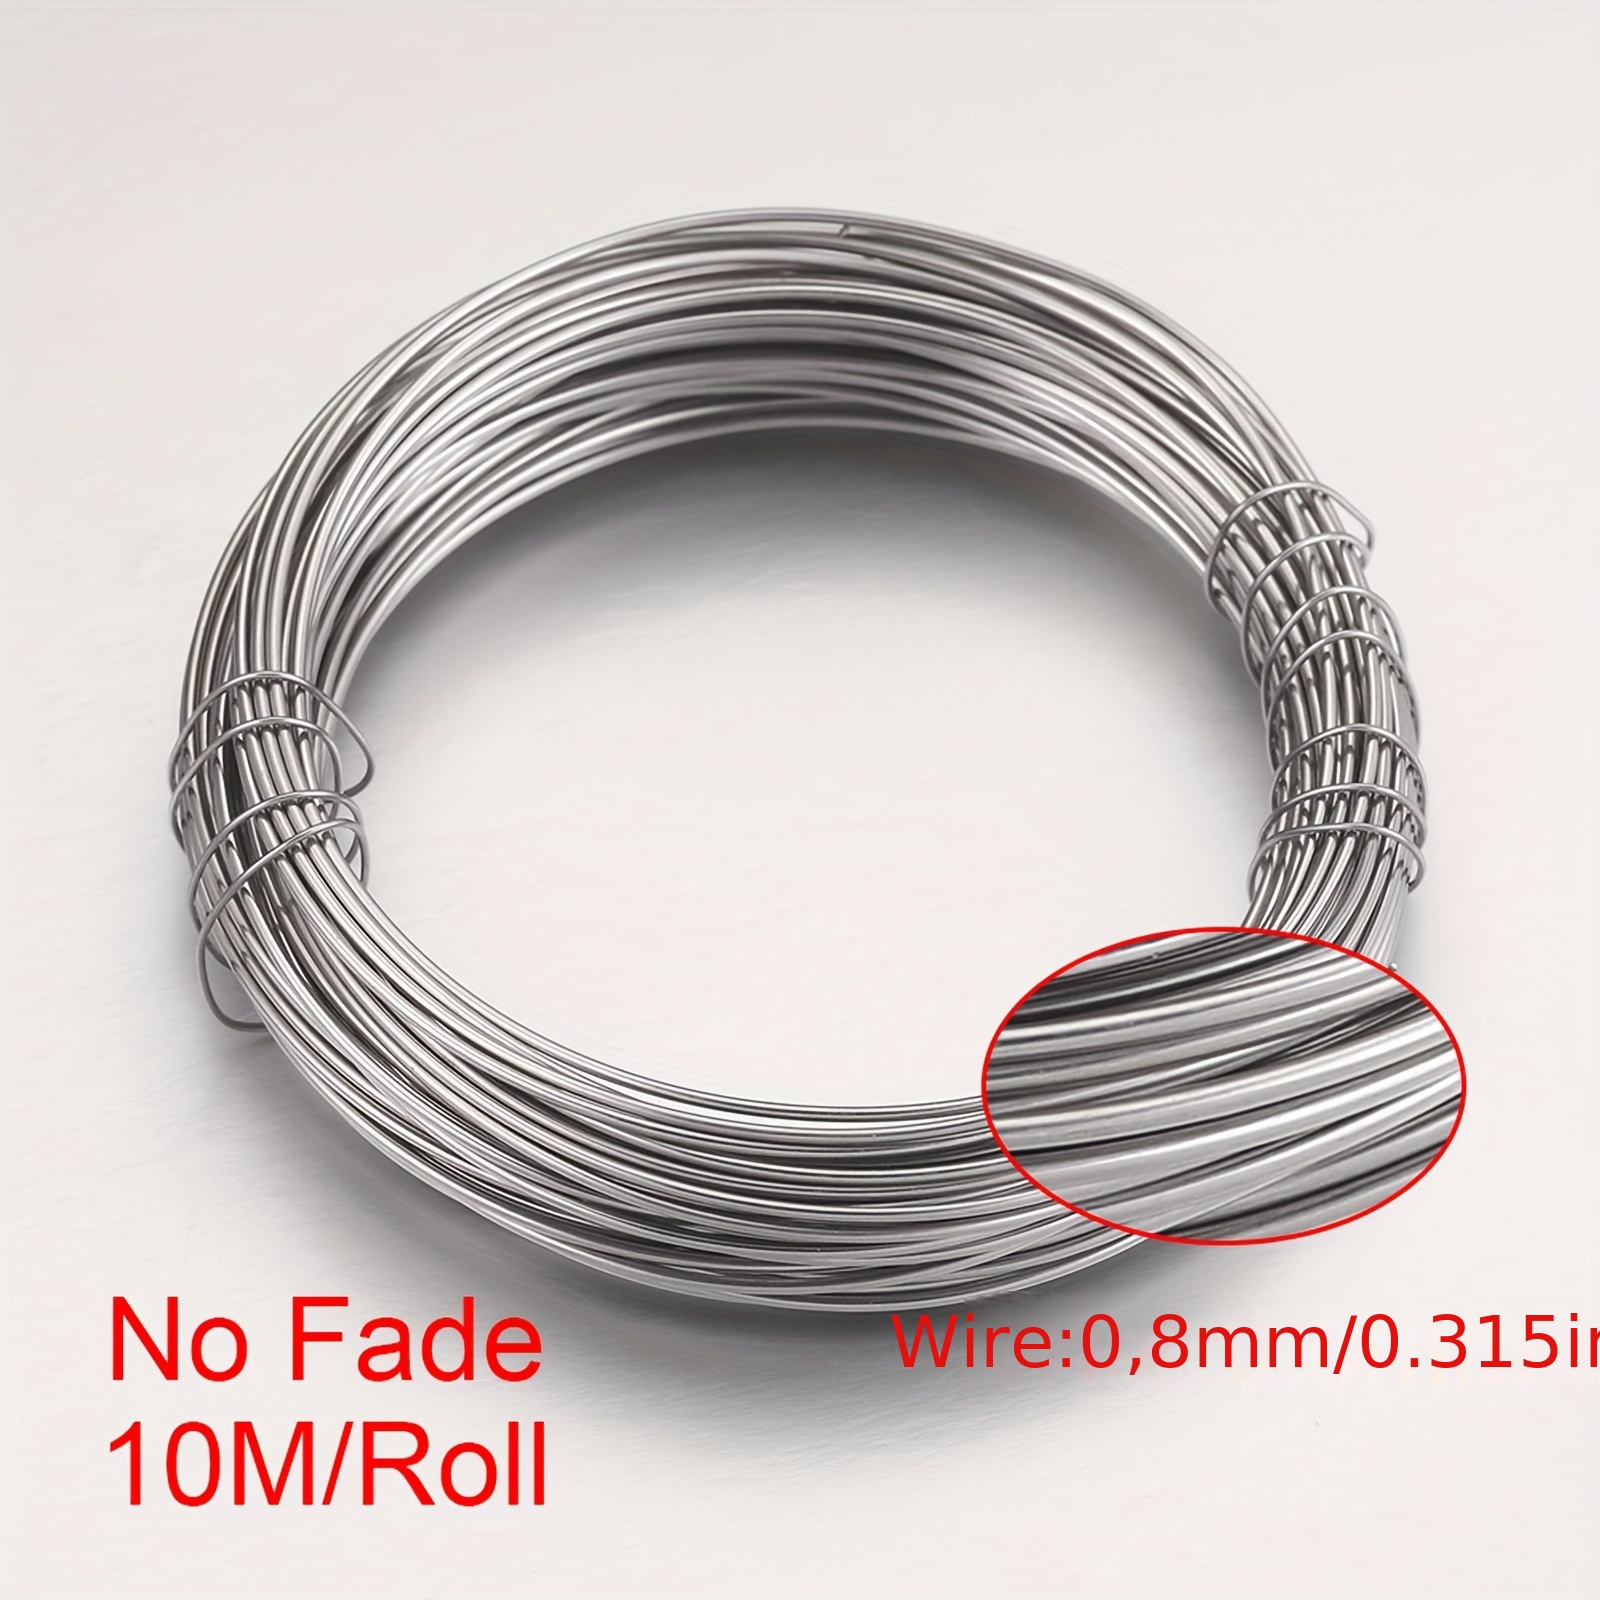 20 Gauge Stainless Steel Wire for Jewelry Making, Bailing Wire